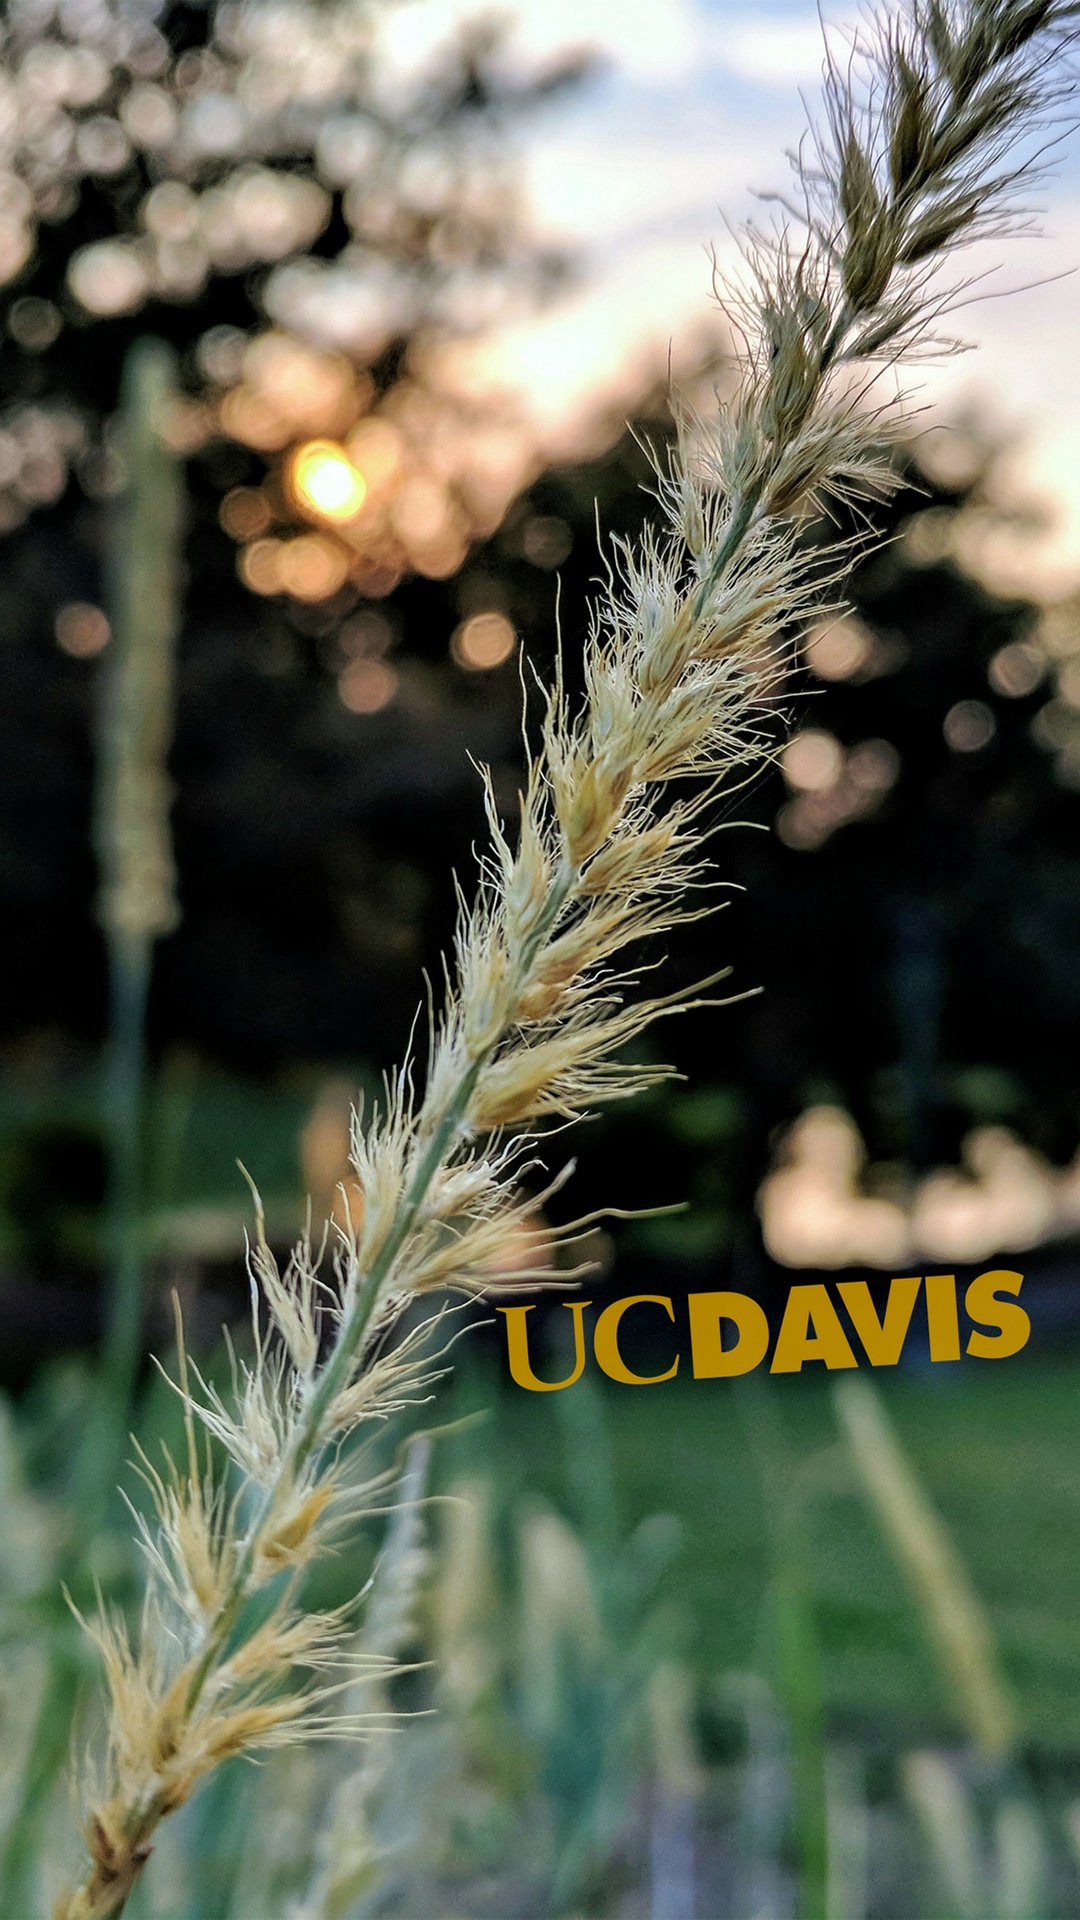 UC Davis Some Campus Wallpaper For Your Phone? Check Out Our & Stories Today To Grab Your Favorite Fall Papers. #UCDavis